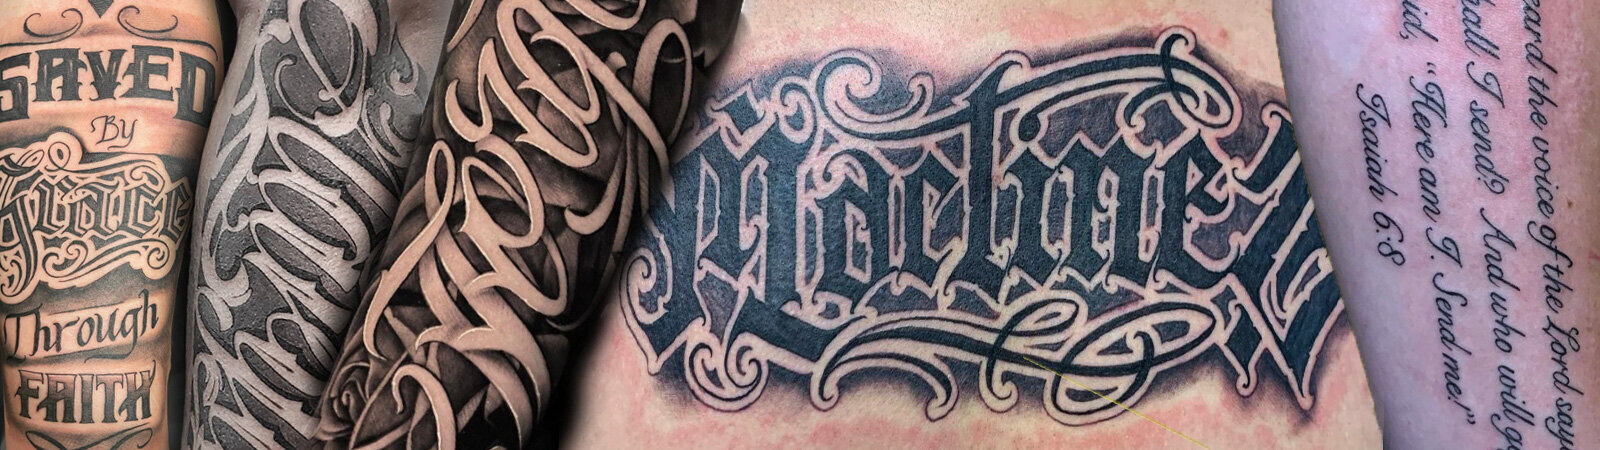 Lettering Tattoo Ideas Pictures and Designs  TatRing